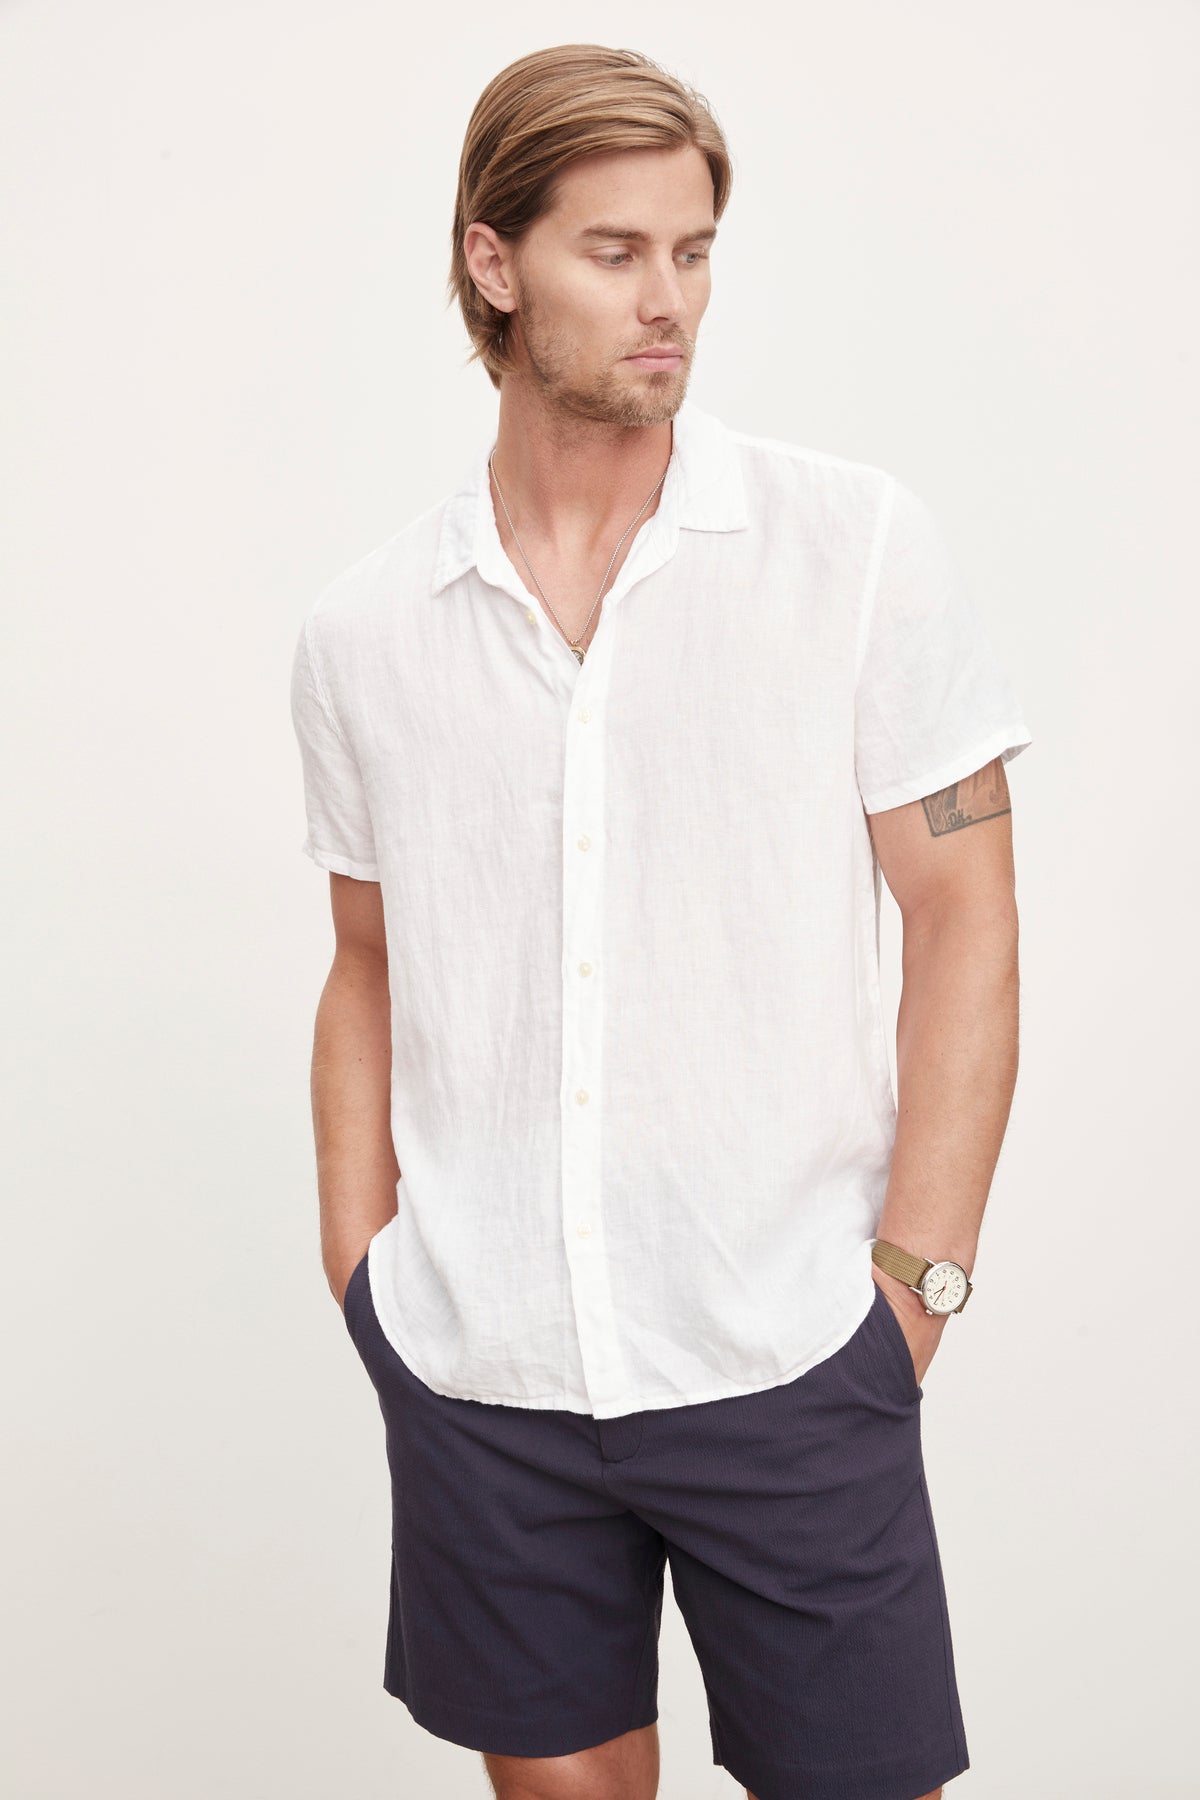 A man in a Velvet by Graham & Spencer MACKIE LINEN BUTTON-UP SHIRT and navy shorts, standing with one hand in his pocket and a watch on his left wrist, epitomizes the relaxed fit of a summer wardrobe.-36753541267649